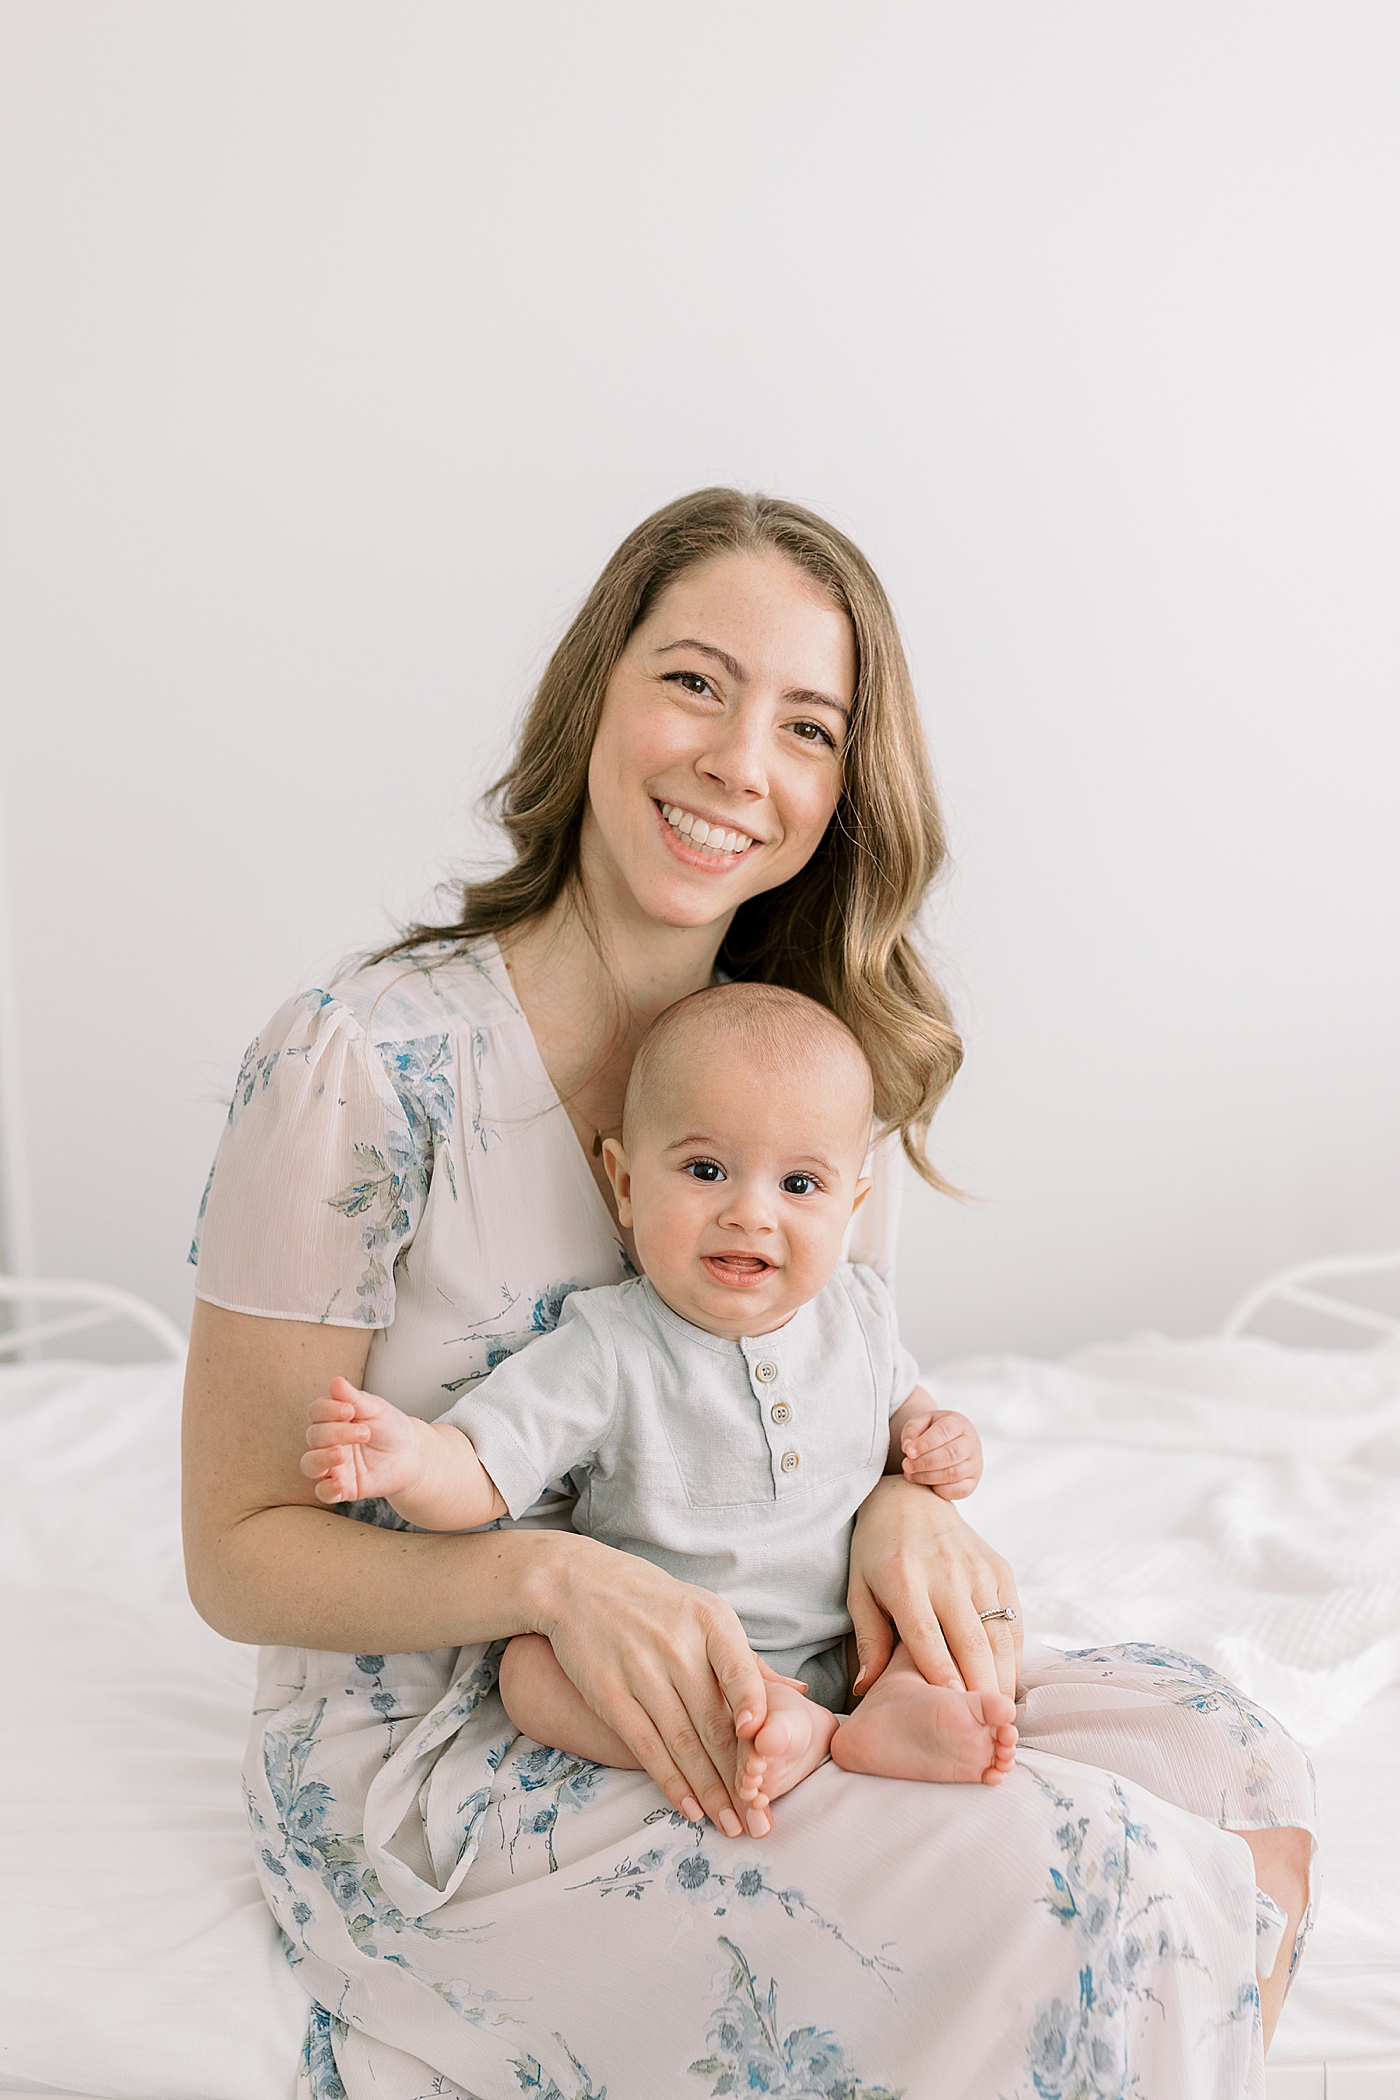 during his Six-Month Sitter Milestone | Image by Caitlyn Motycka